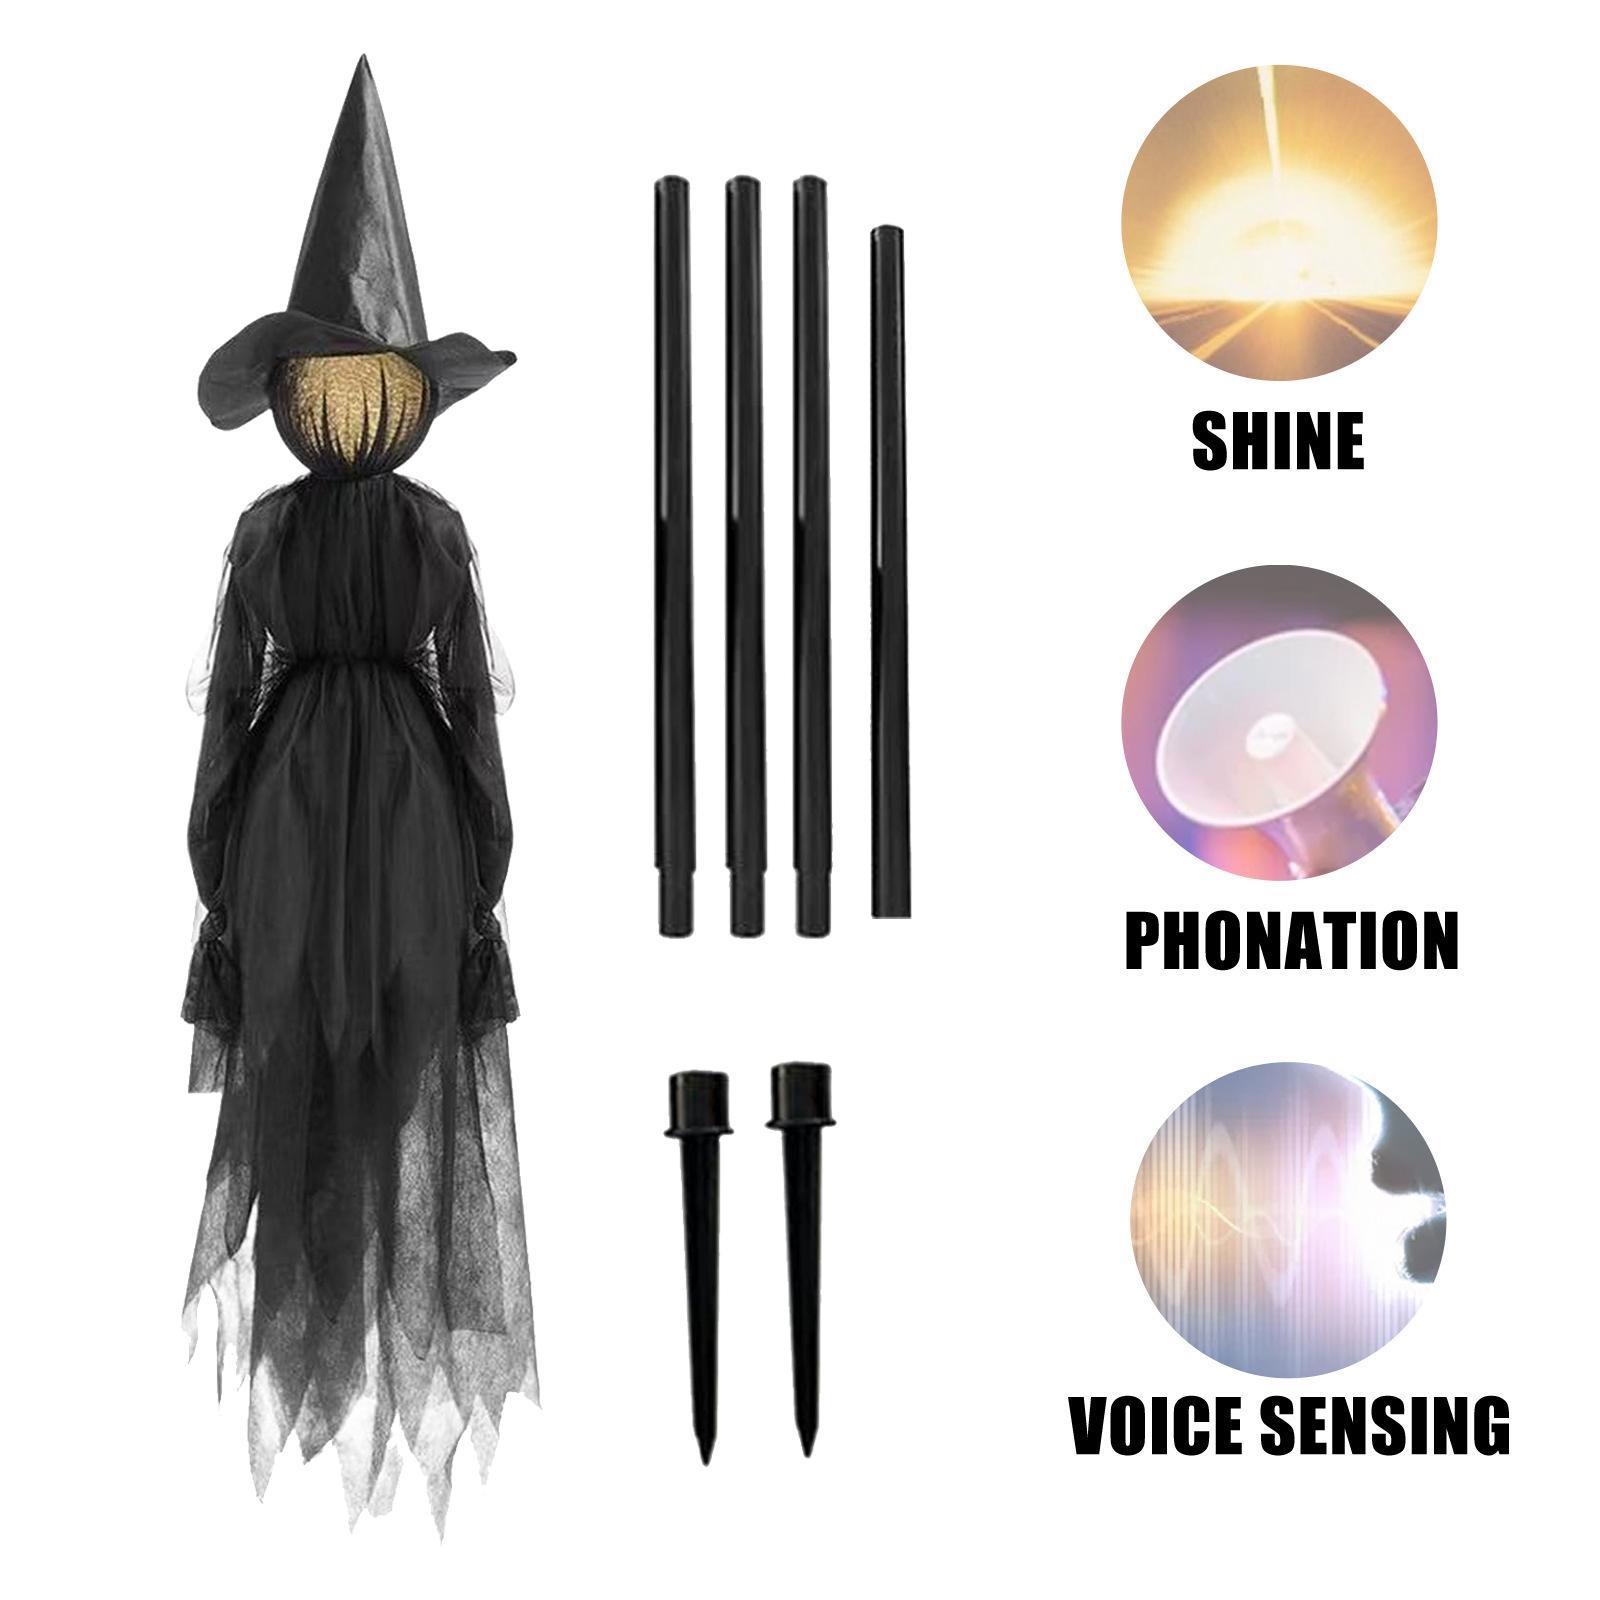 Halloween Decorations Outdoor Halloween Witch Waterproof Large Gifts Garden Decoration Halloween Ornament for Party Yard